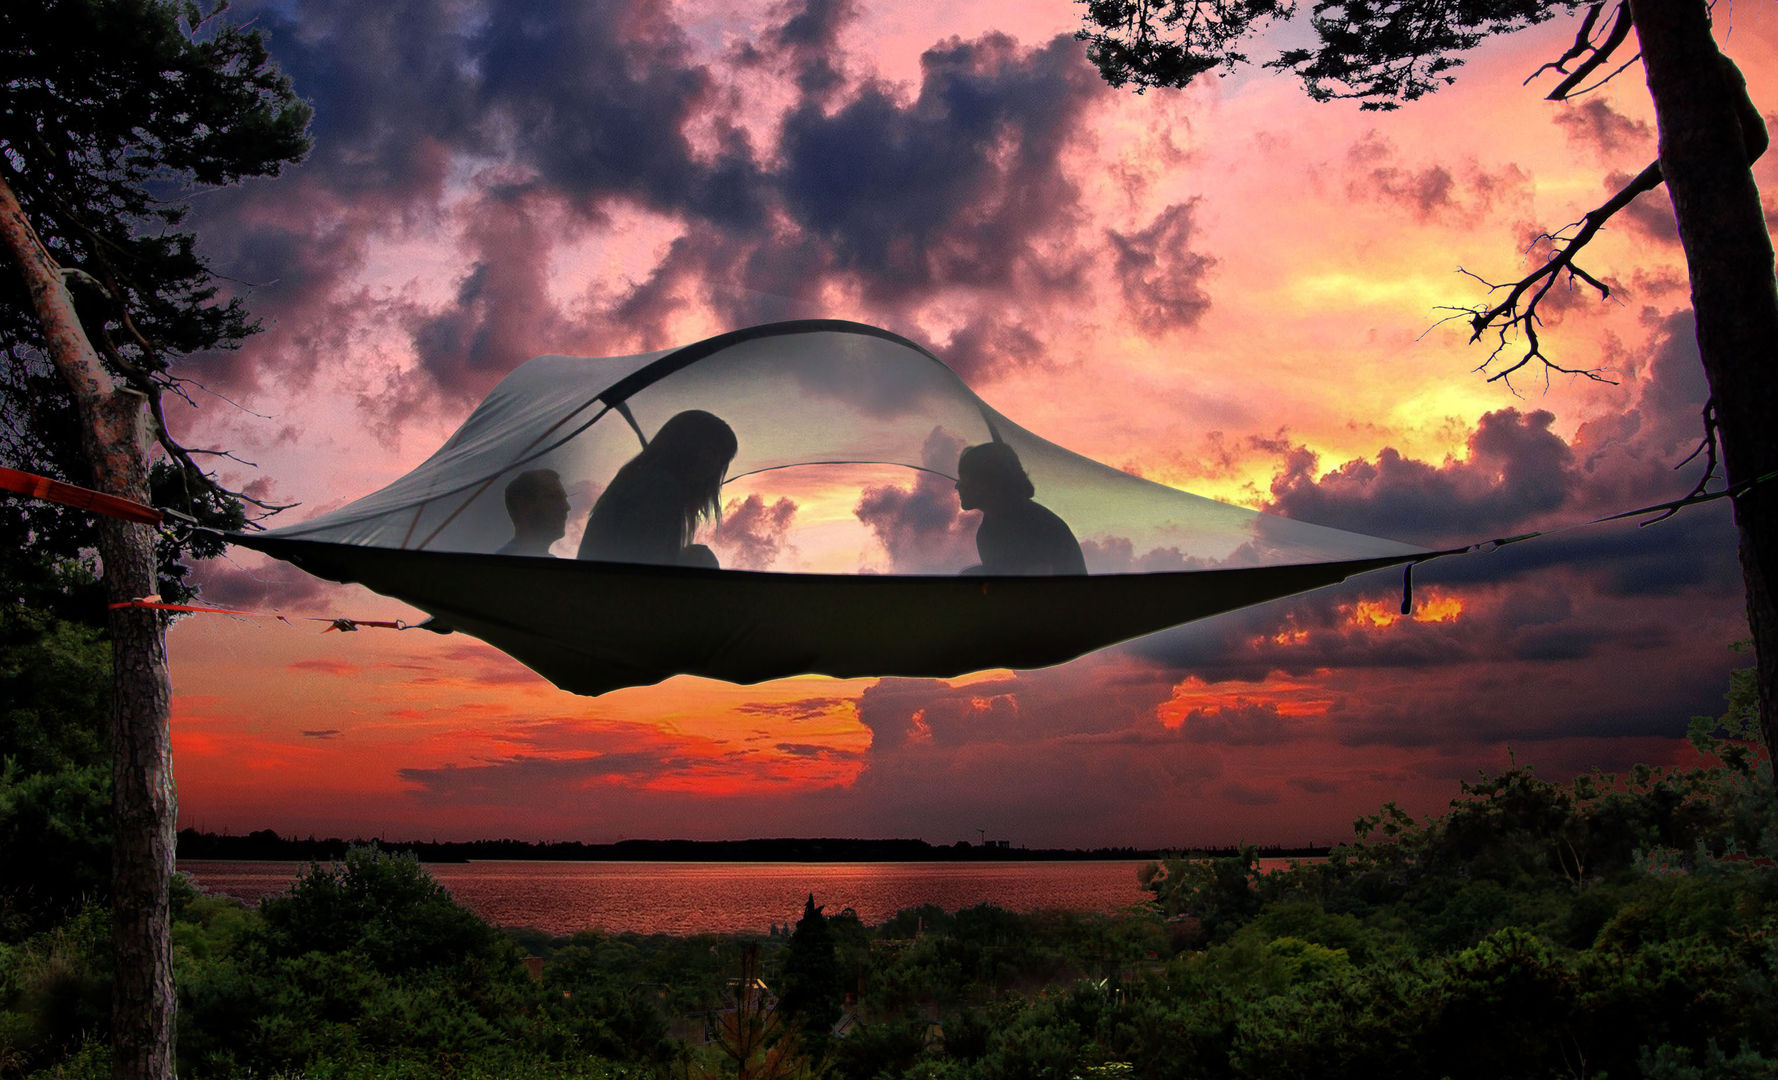 Add a New Touch to Your Camping Adventure with the Tentsile Stingray, Tentsile Tentsile Jardins modernos Baloiços e jogos